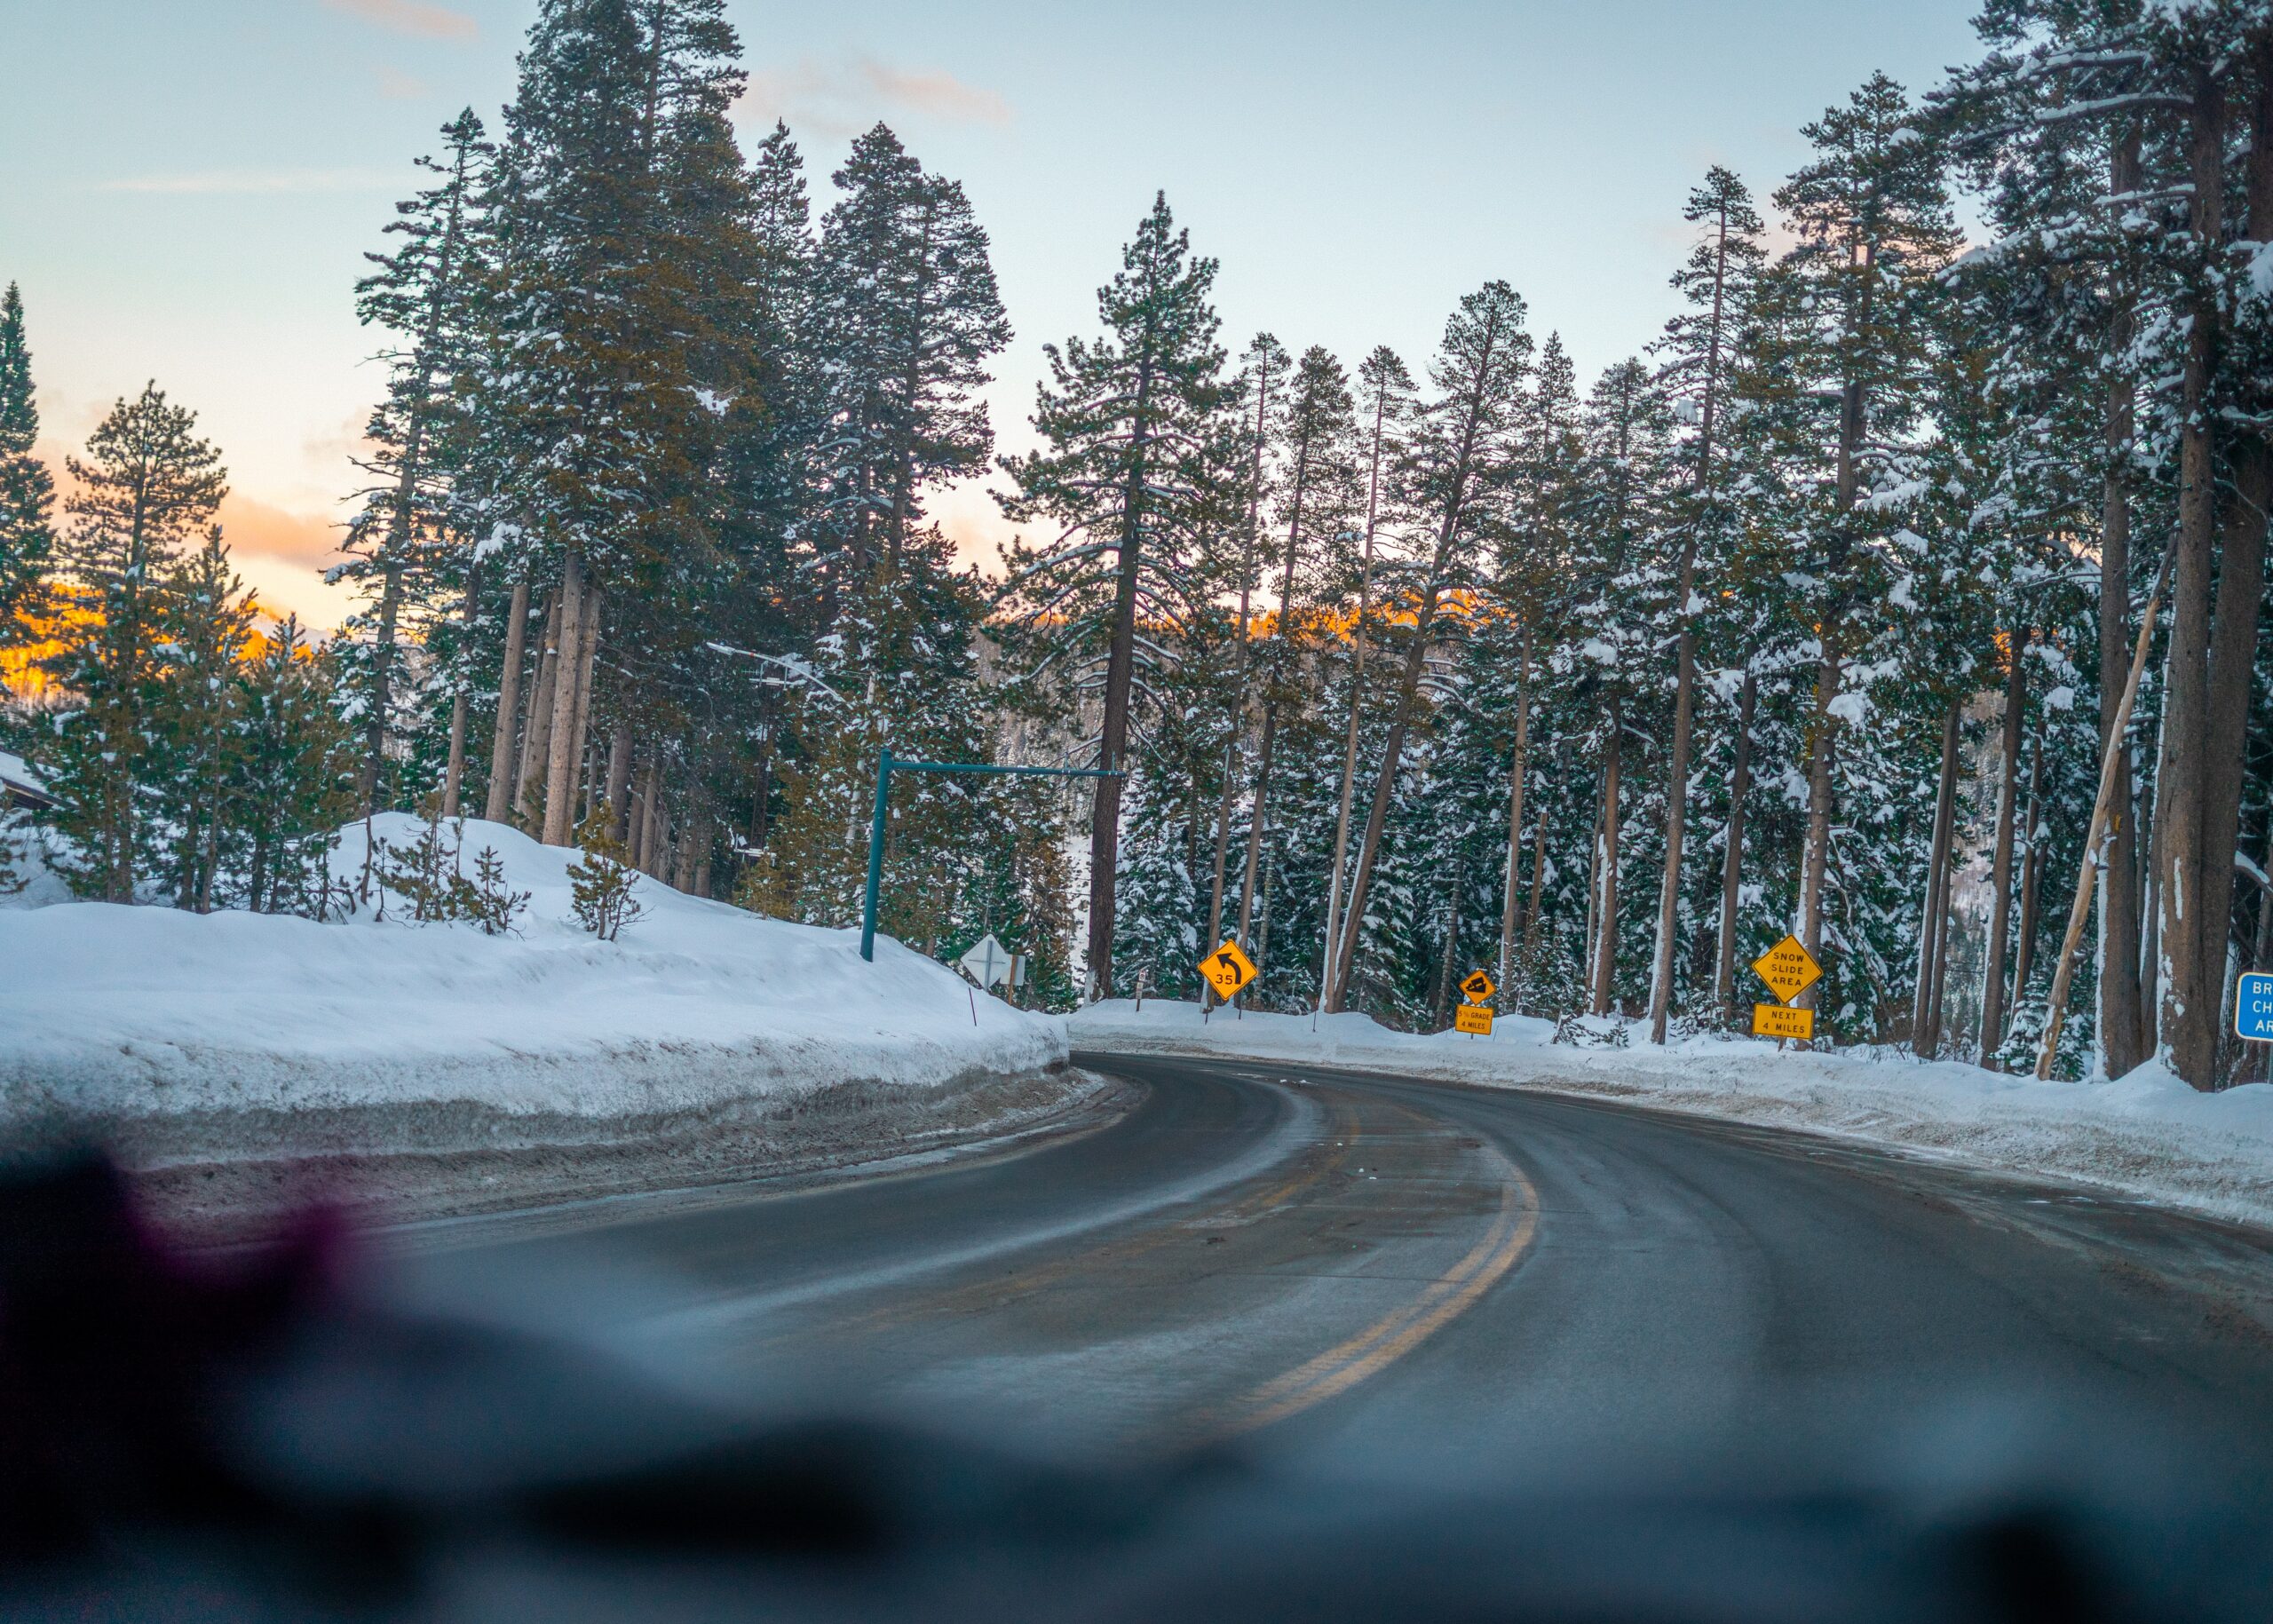 Surviving the Winter Journey Home: College Student’s Guide to Safe Holiday Travel